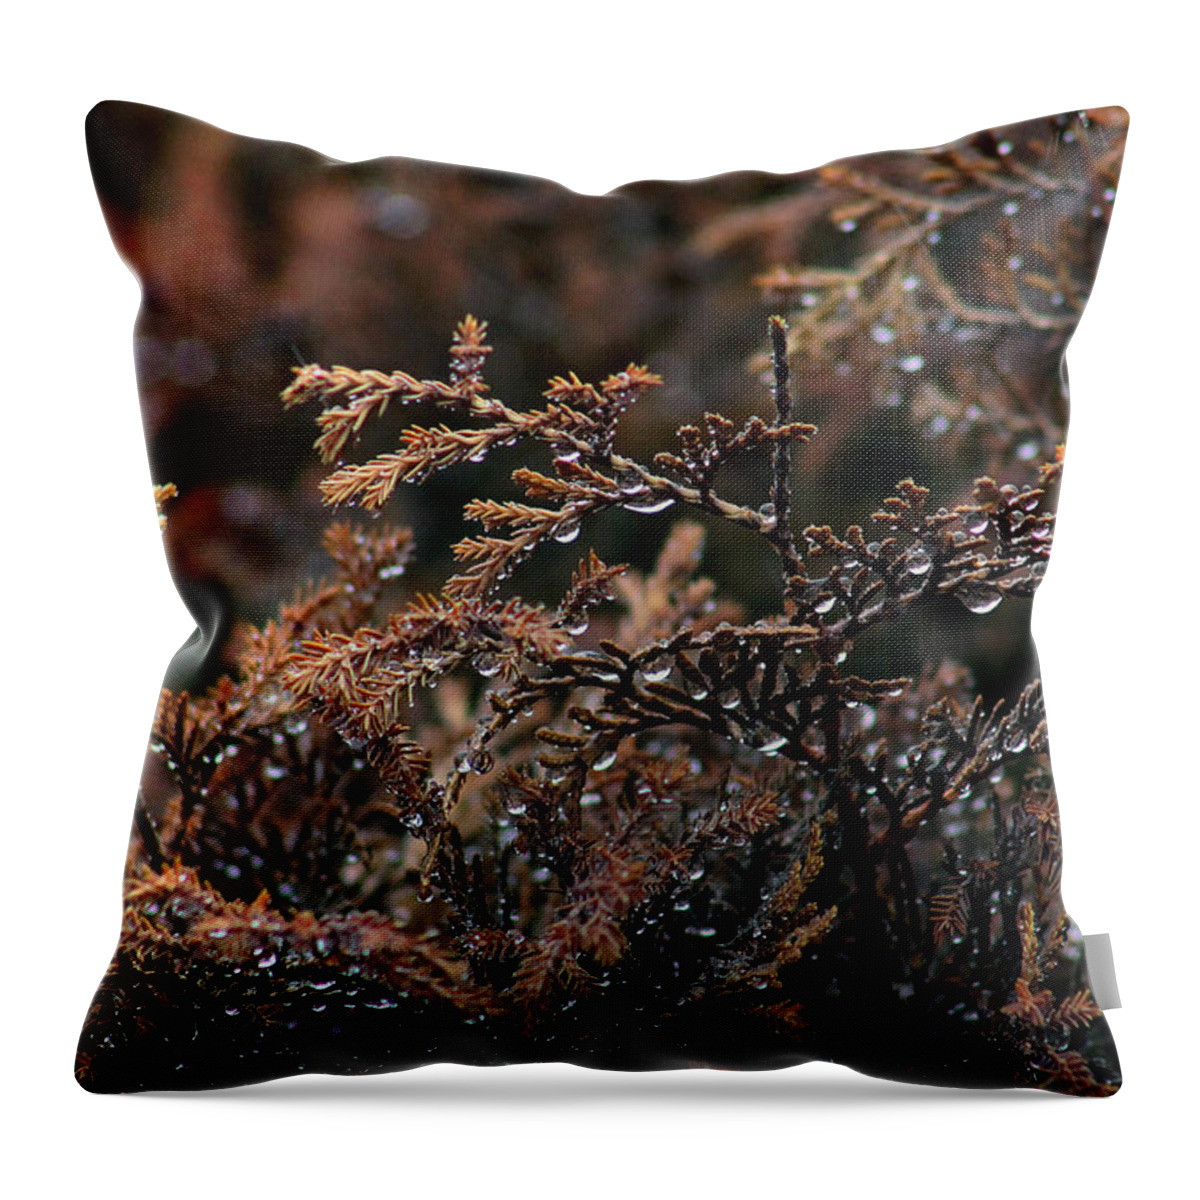 Plants Throw Pillow featuring the photograph Tennessee Dew by Gayle Berry